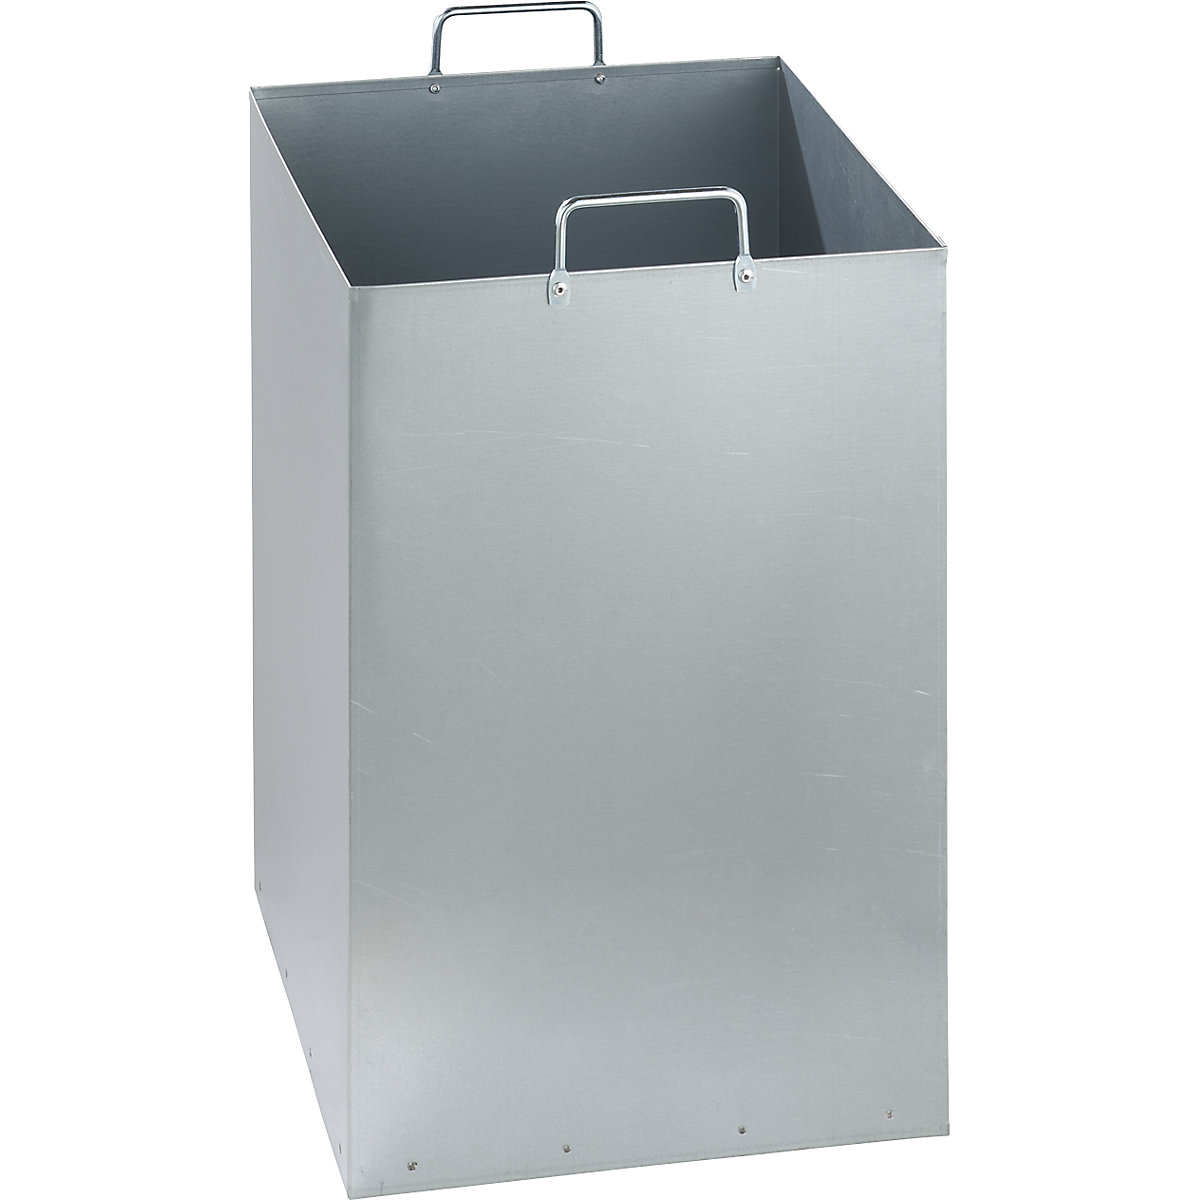 Zinc plated inner container - VAR